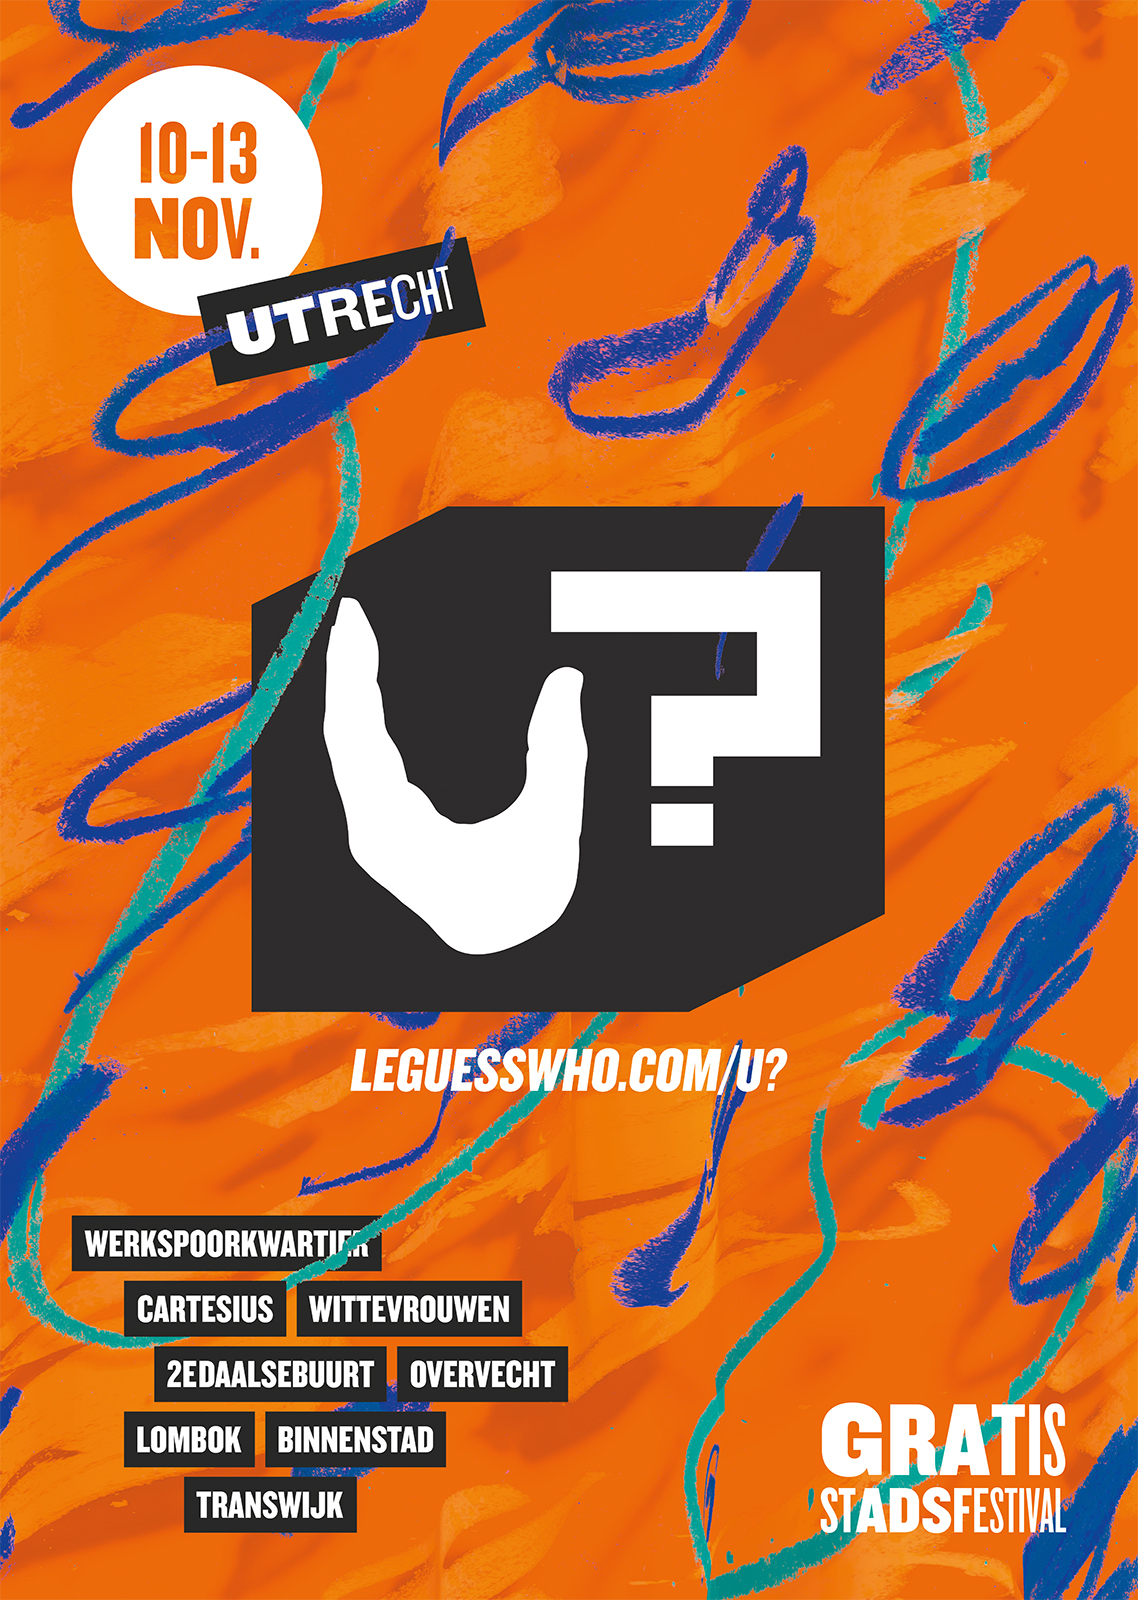 Revealing the full program + timetable for U?, LGW's largest free day program to date